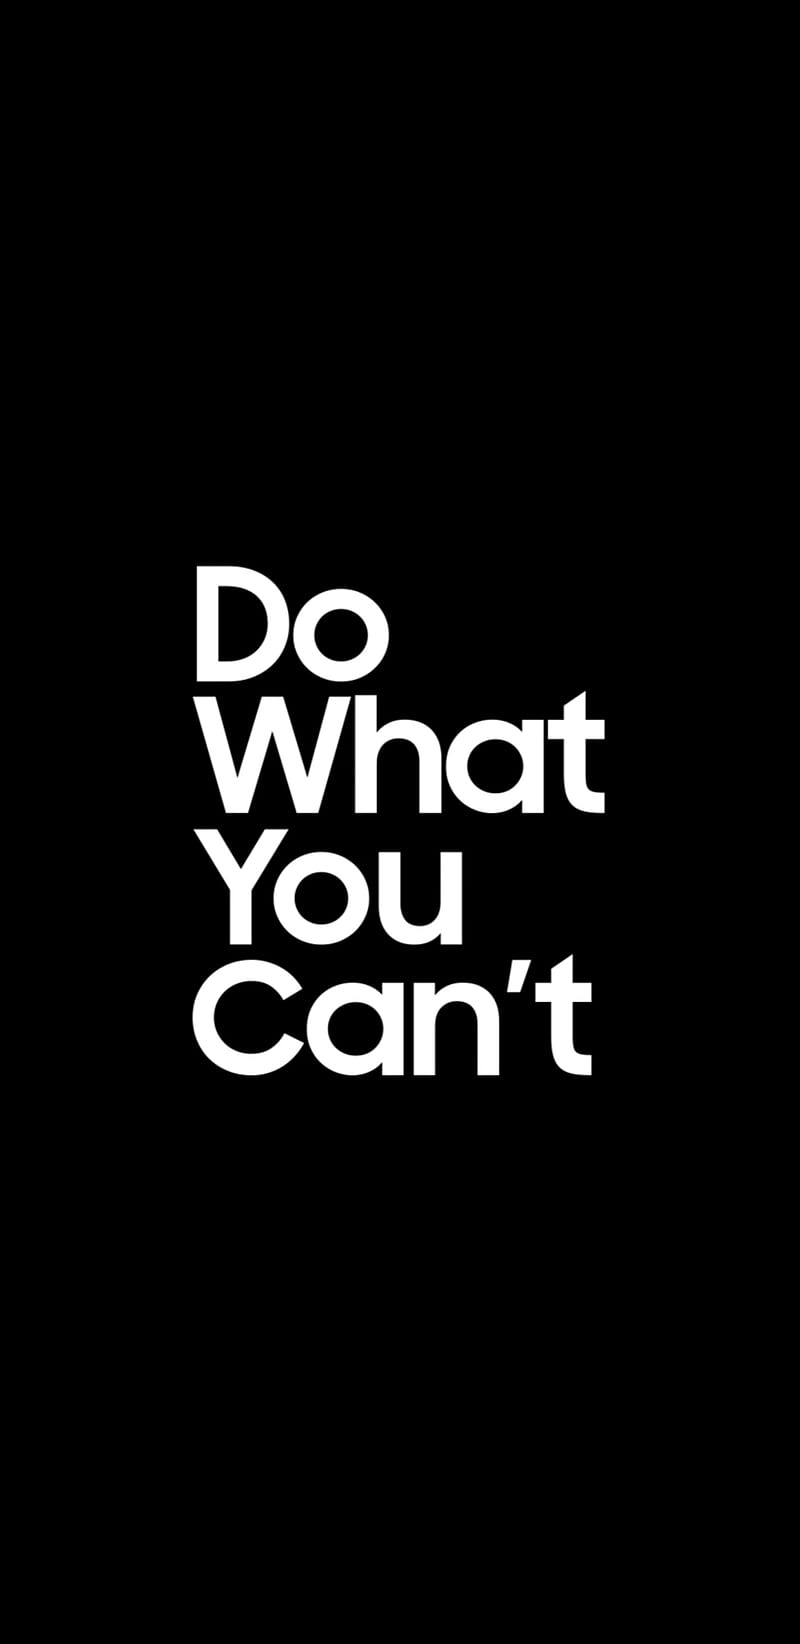 Do What You Cant, 2019, android, dowhatyoucant, galaxy, quote, s9, samsung, samsung galaxy, HD phone wallpaper